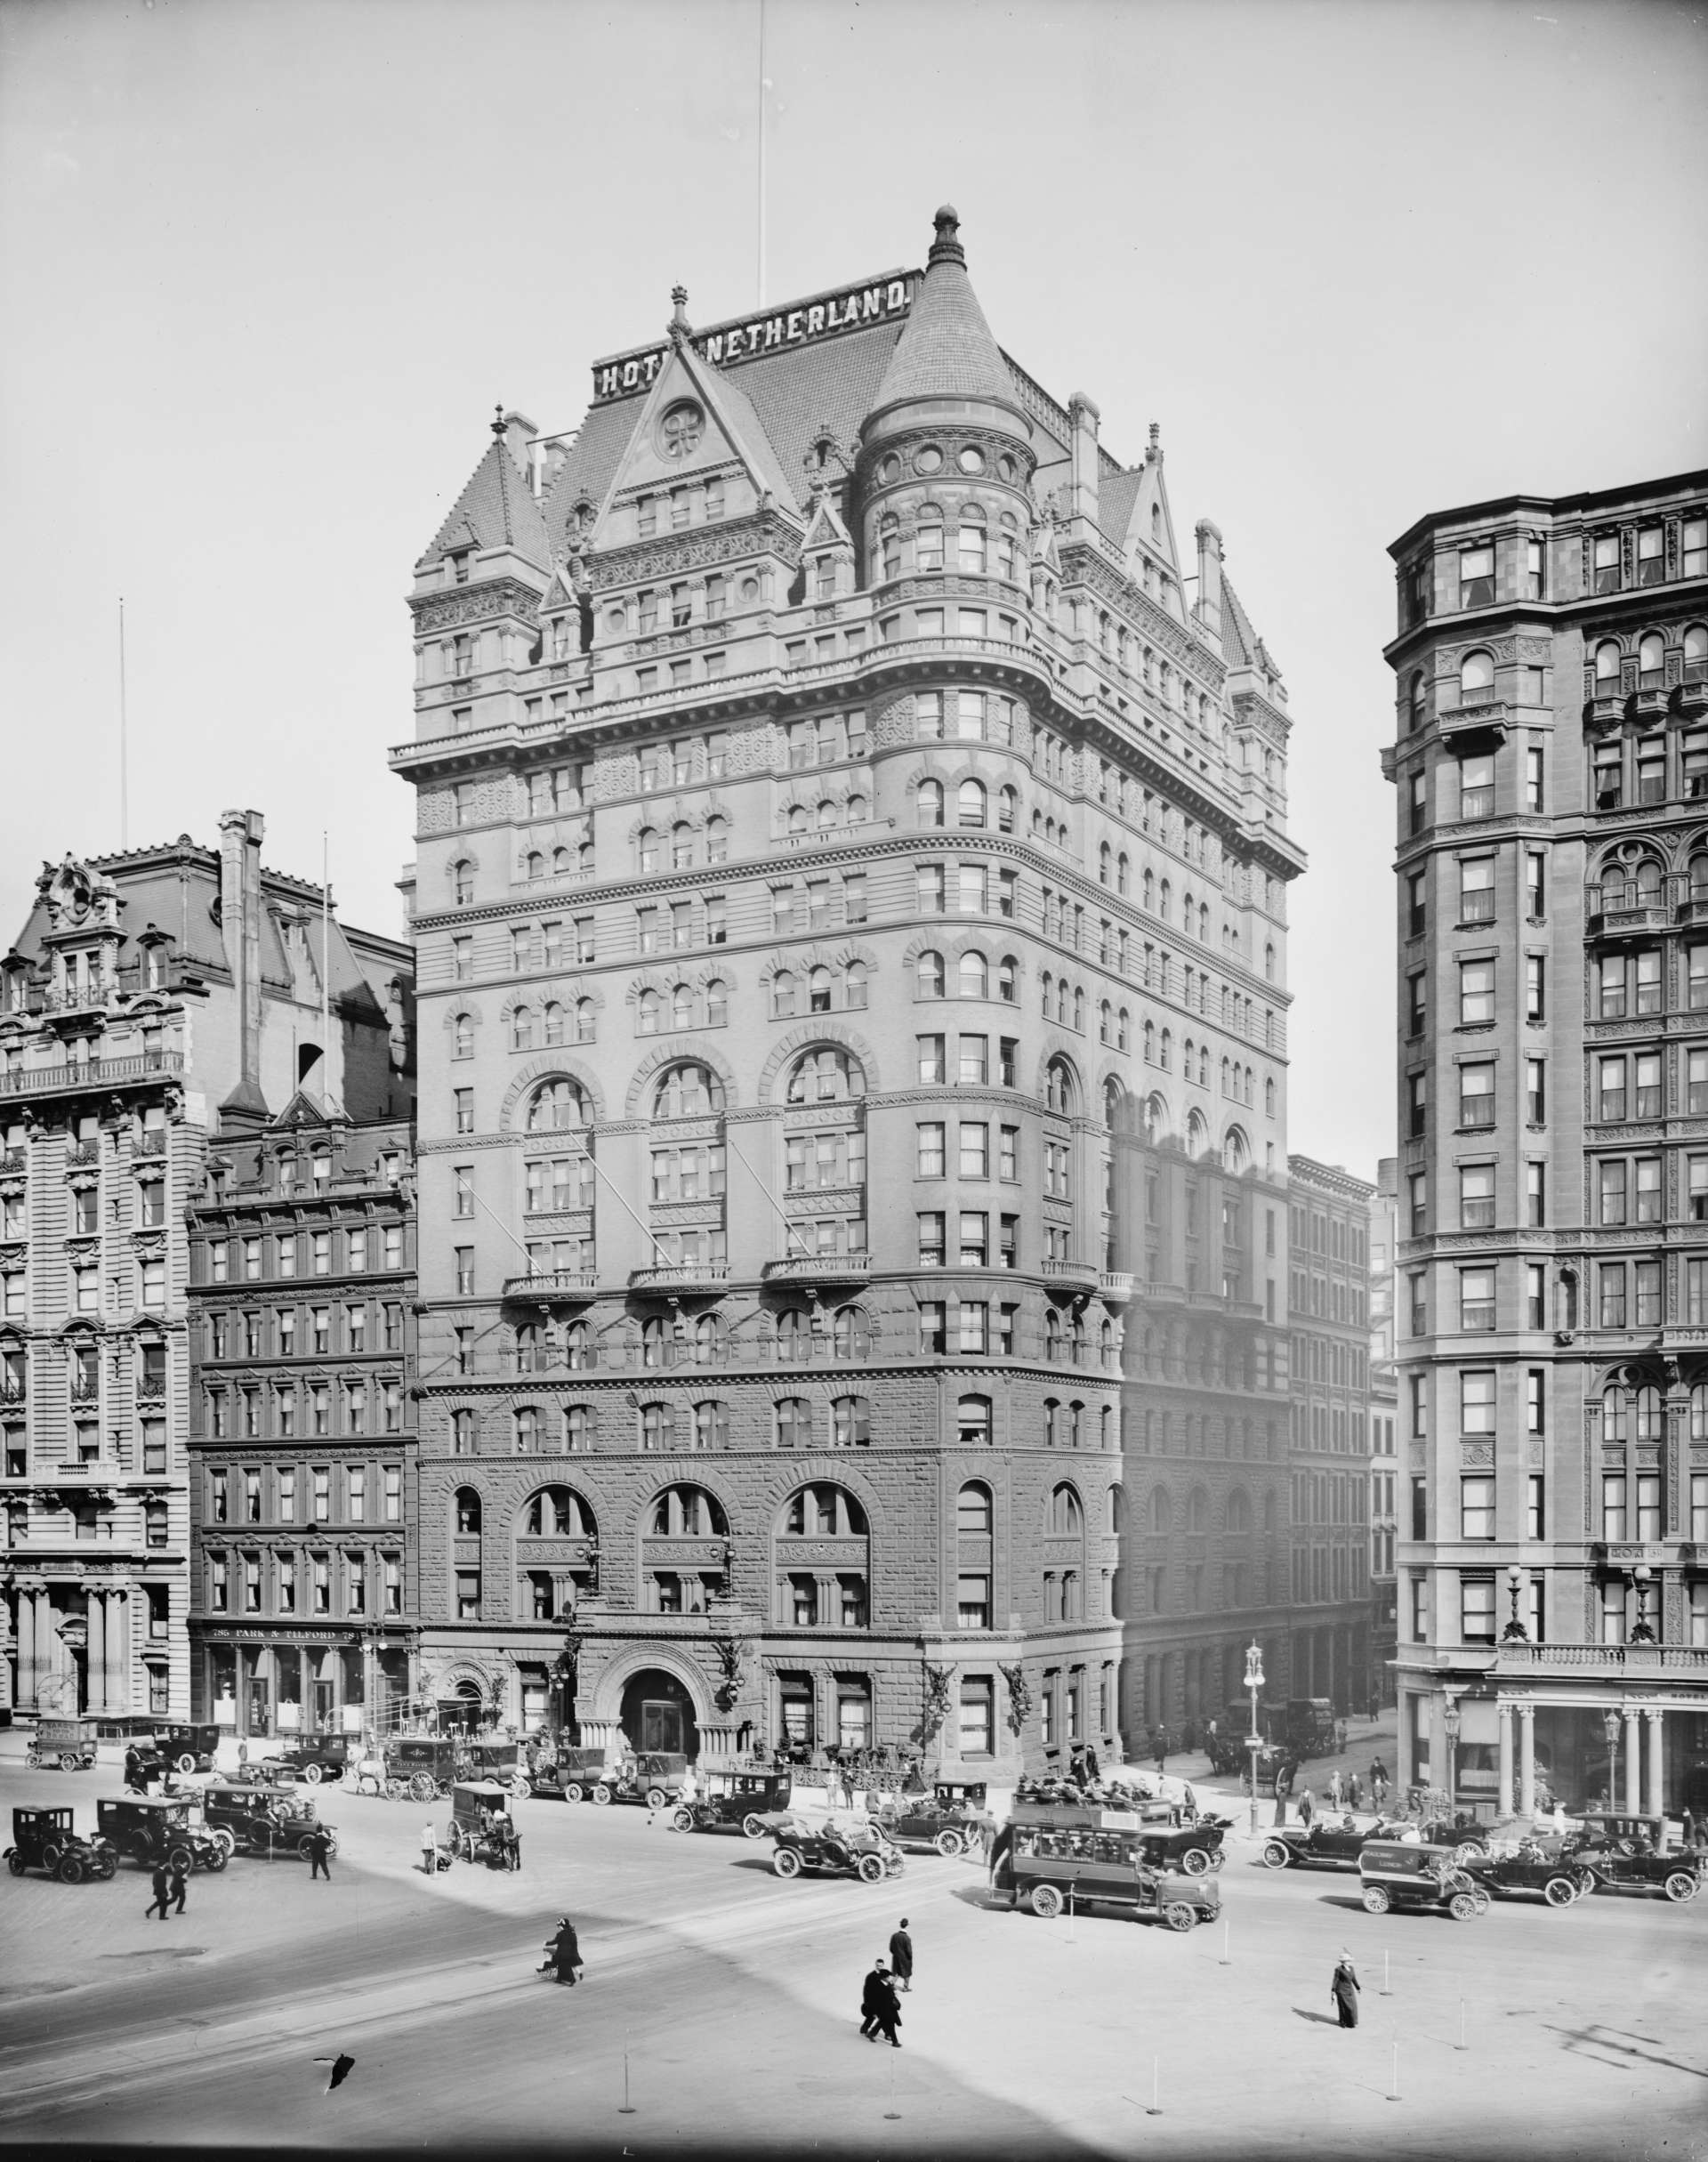 The New Netherland Hotel - the first hotel in New York built by Willam Waldorf Astor.